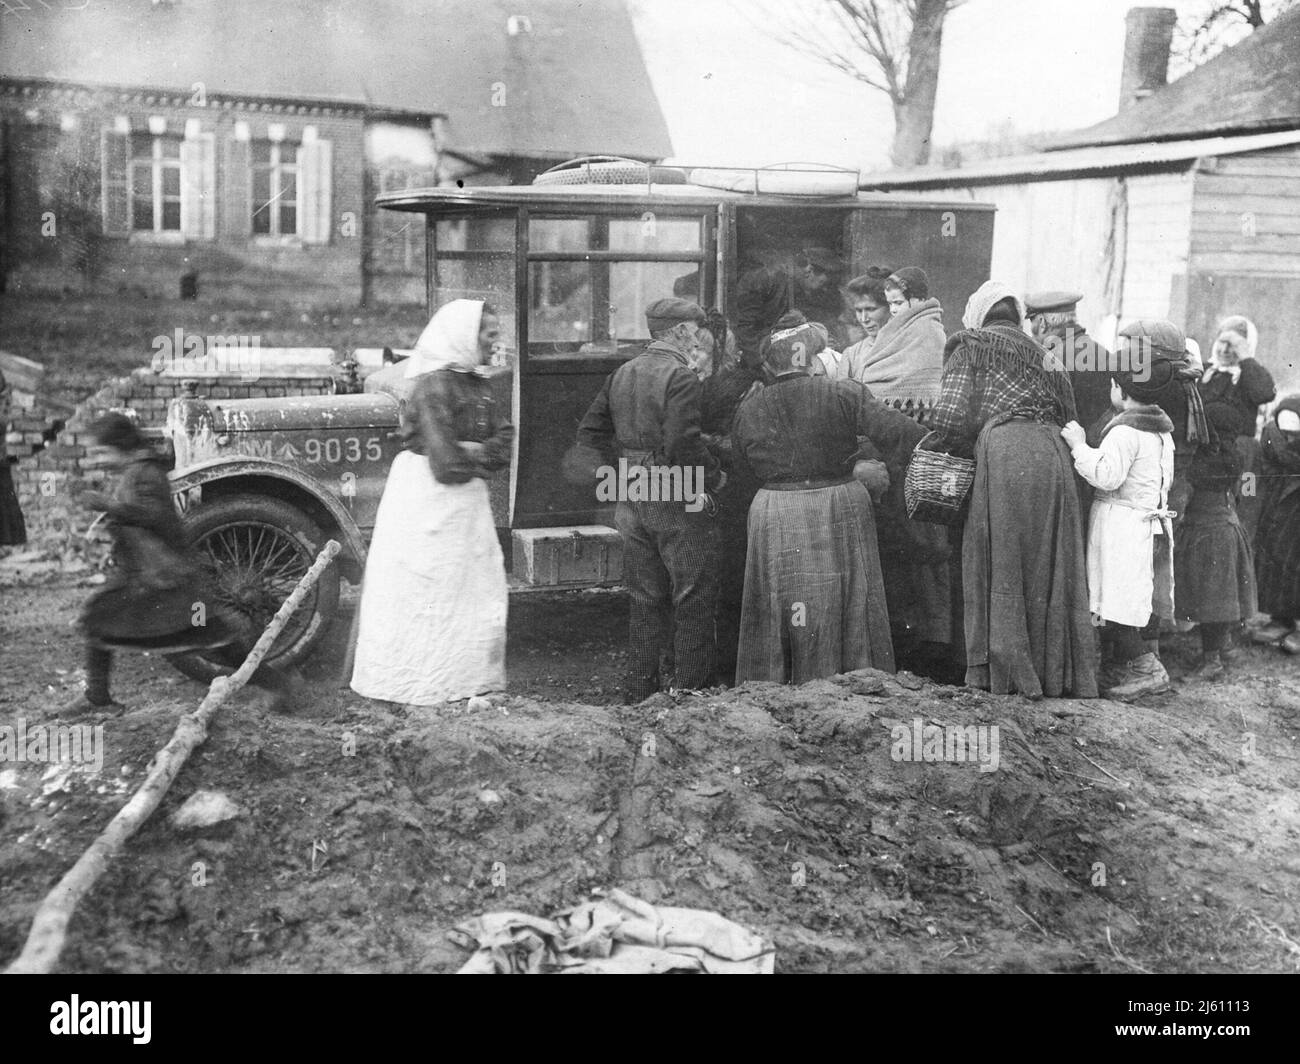 Civilian women clustered around a British army truck that is distributing food to people Stock Photo